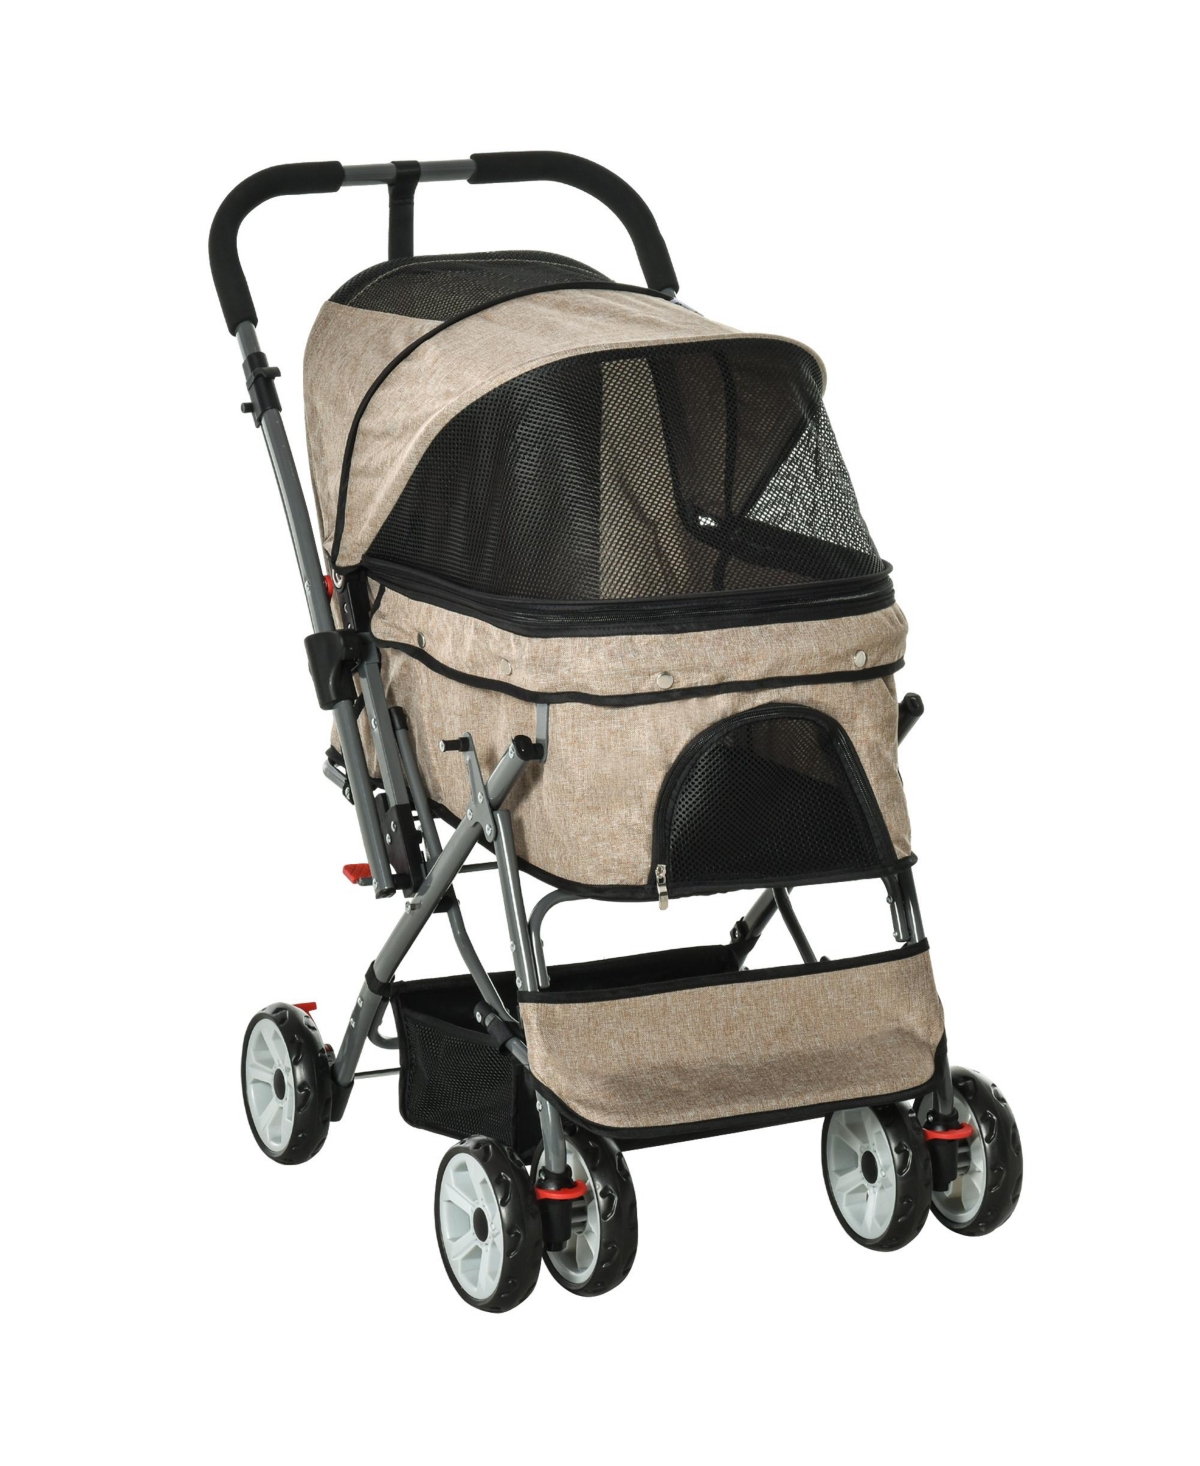 Small Travel Pet Stroller Easy Fold Jogger Pushchair Wheel Canopy - Brown